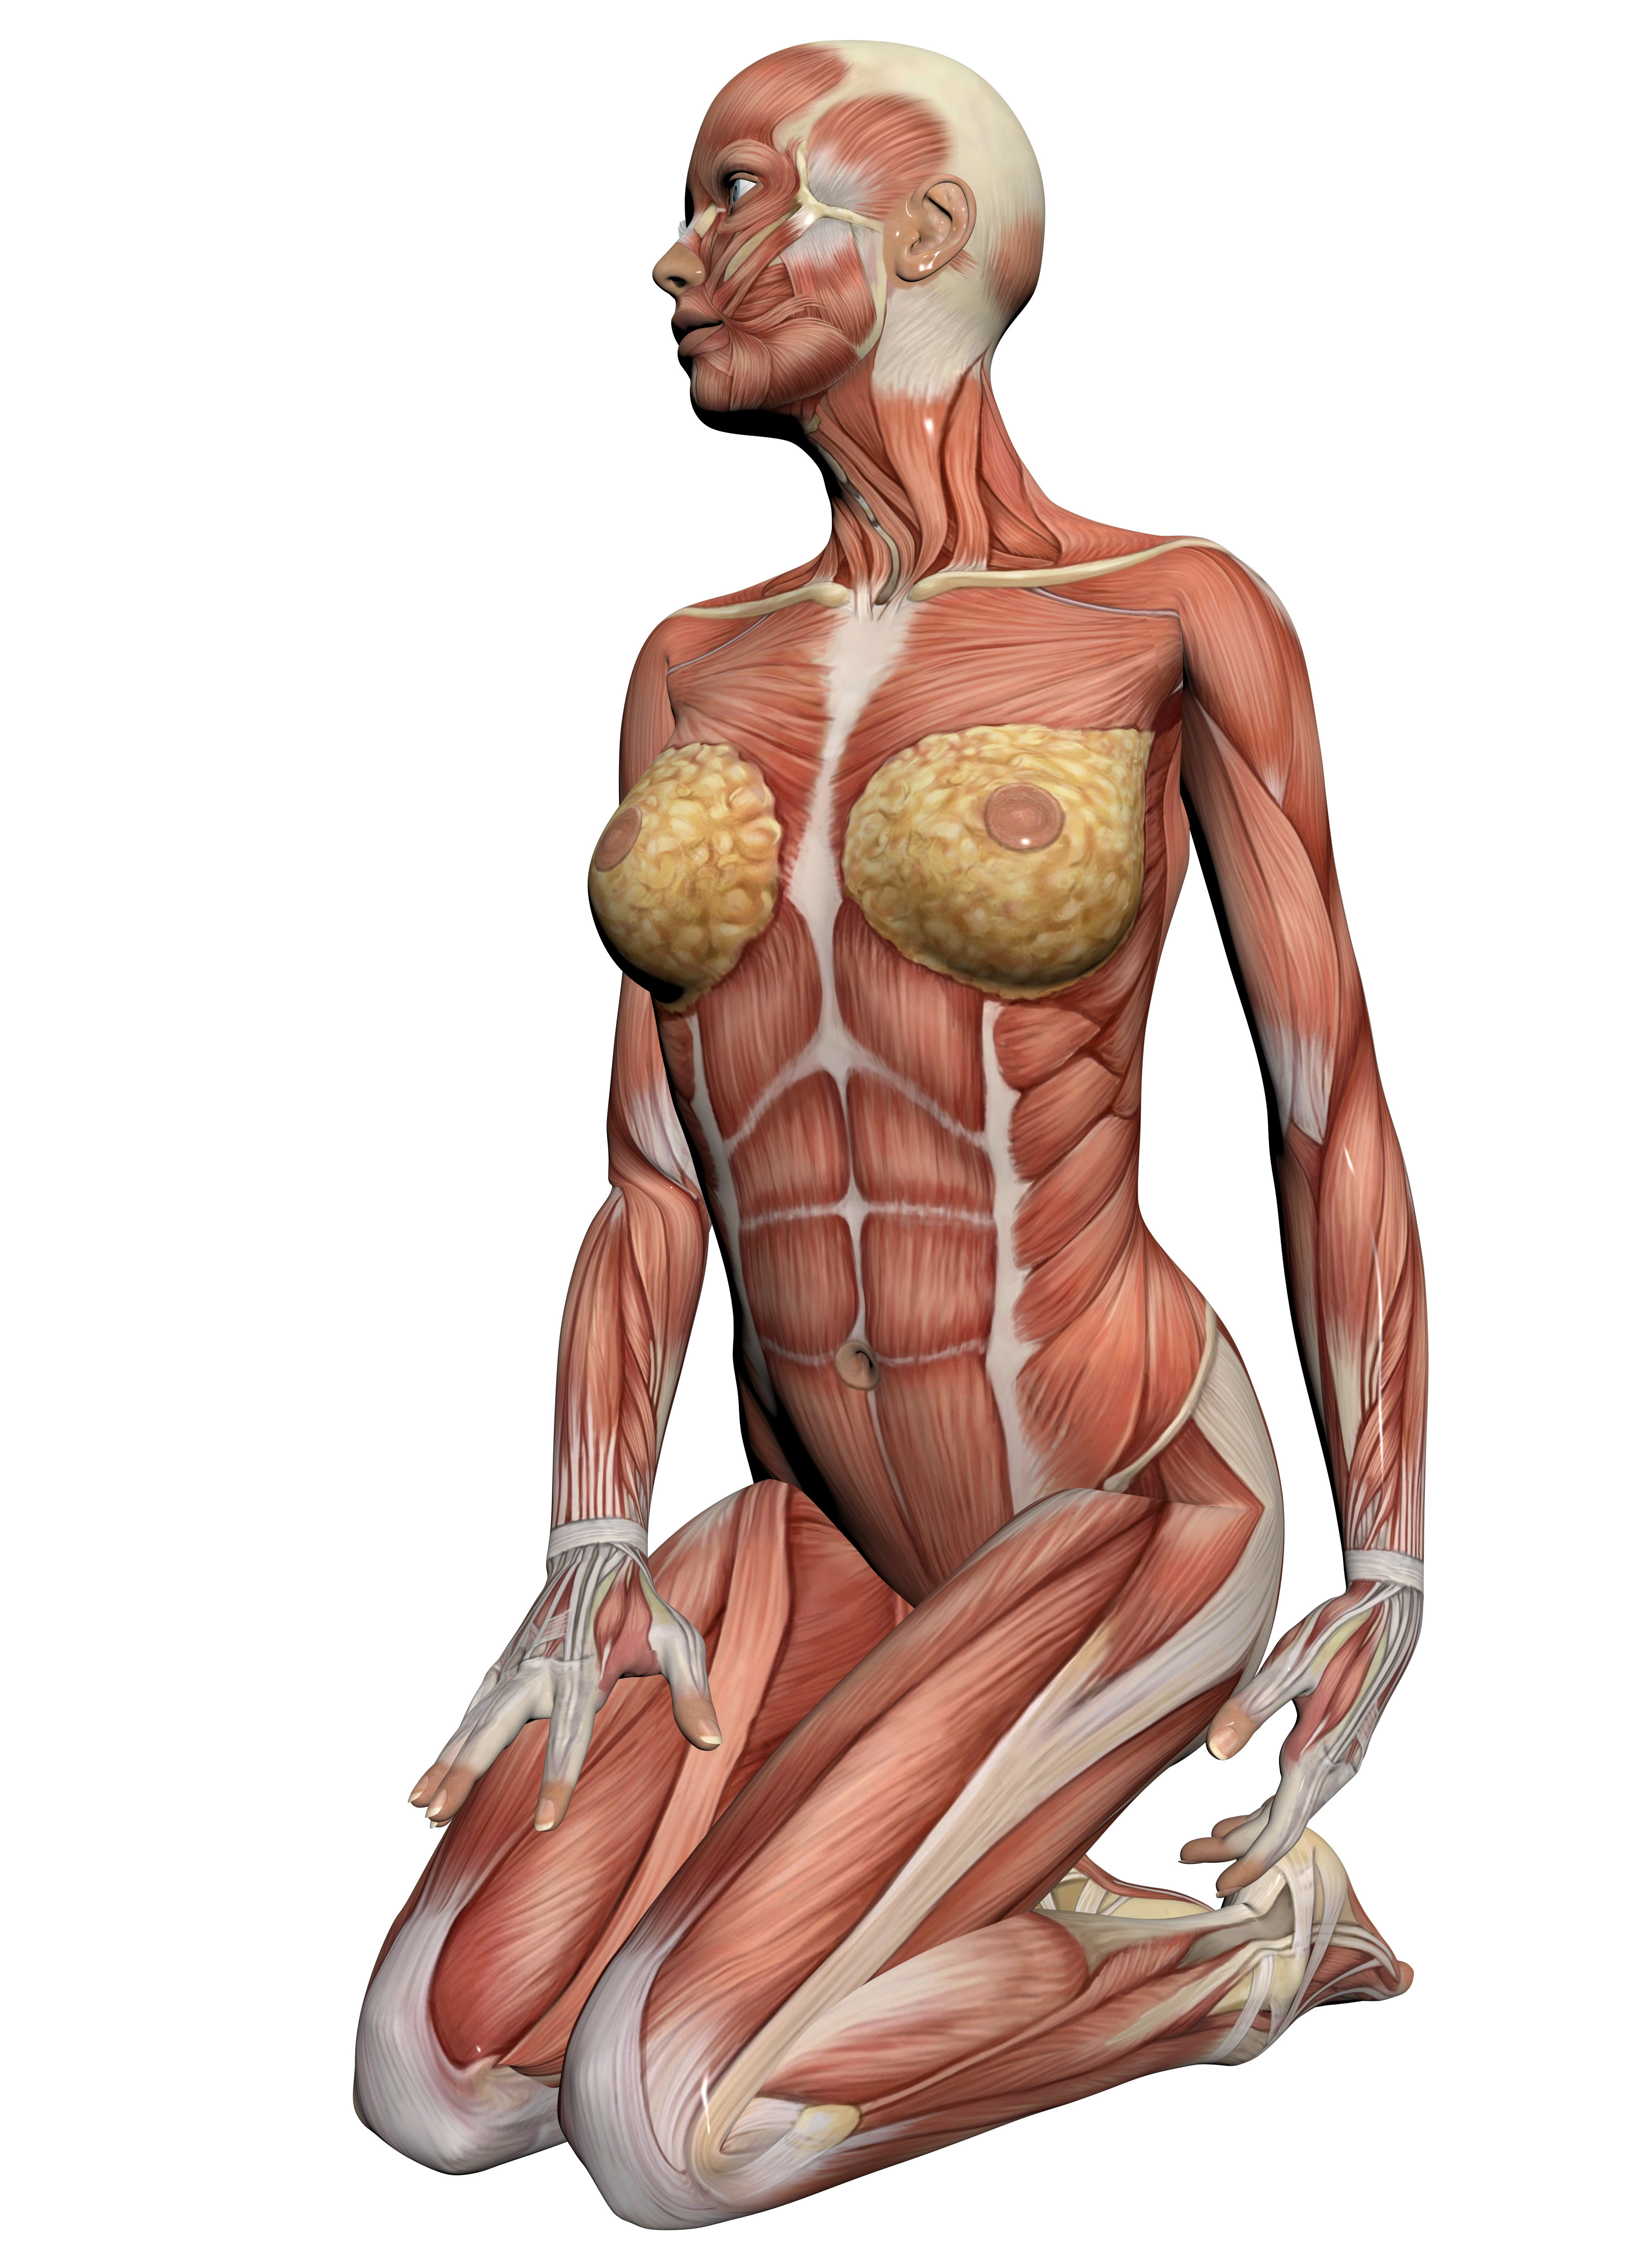 Human Anatomy - Female Muscles made in 3d software